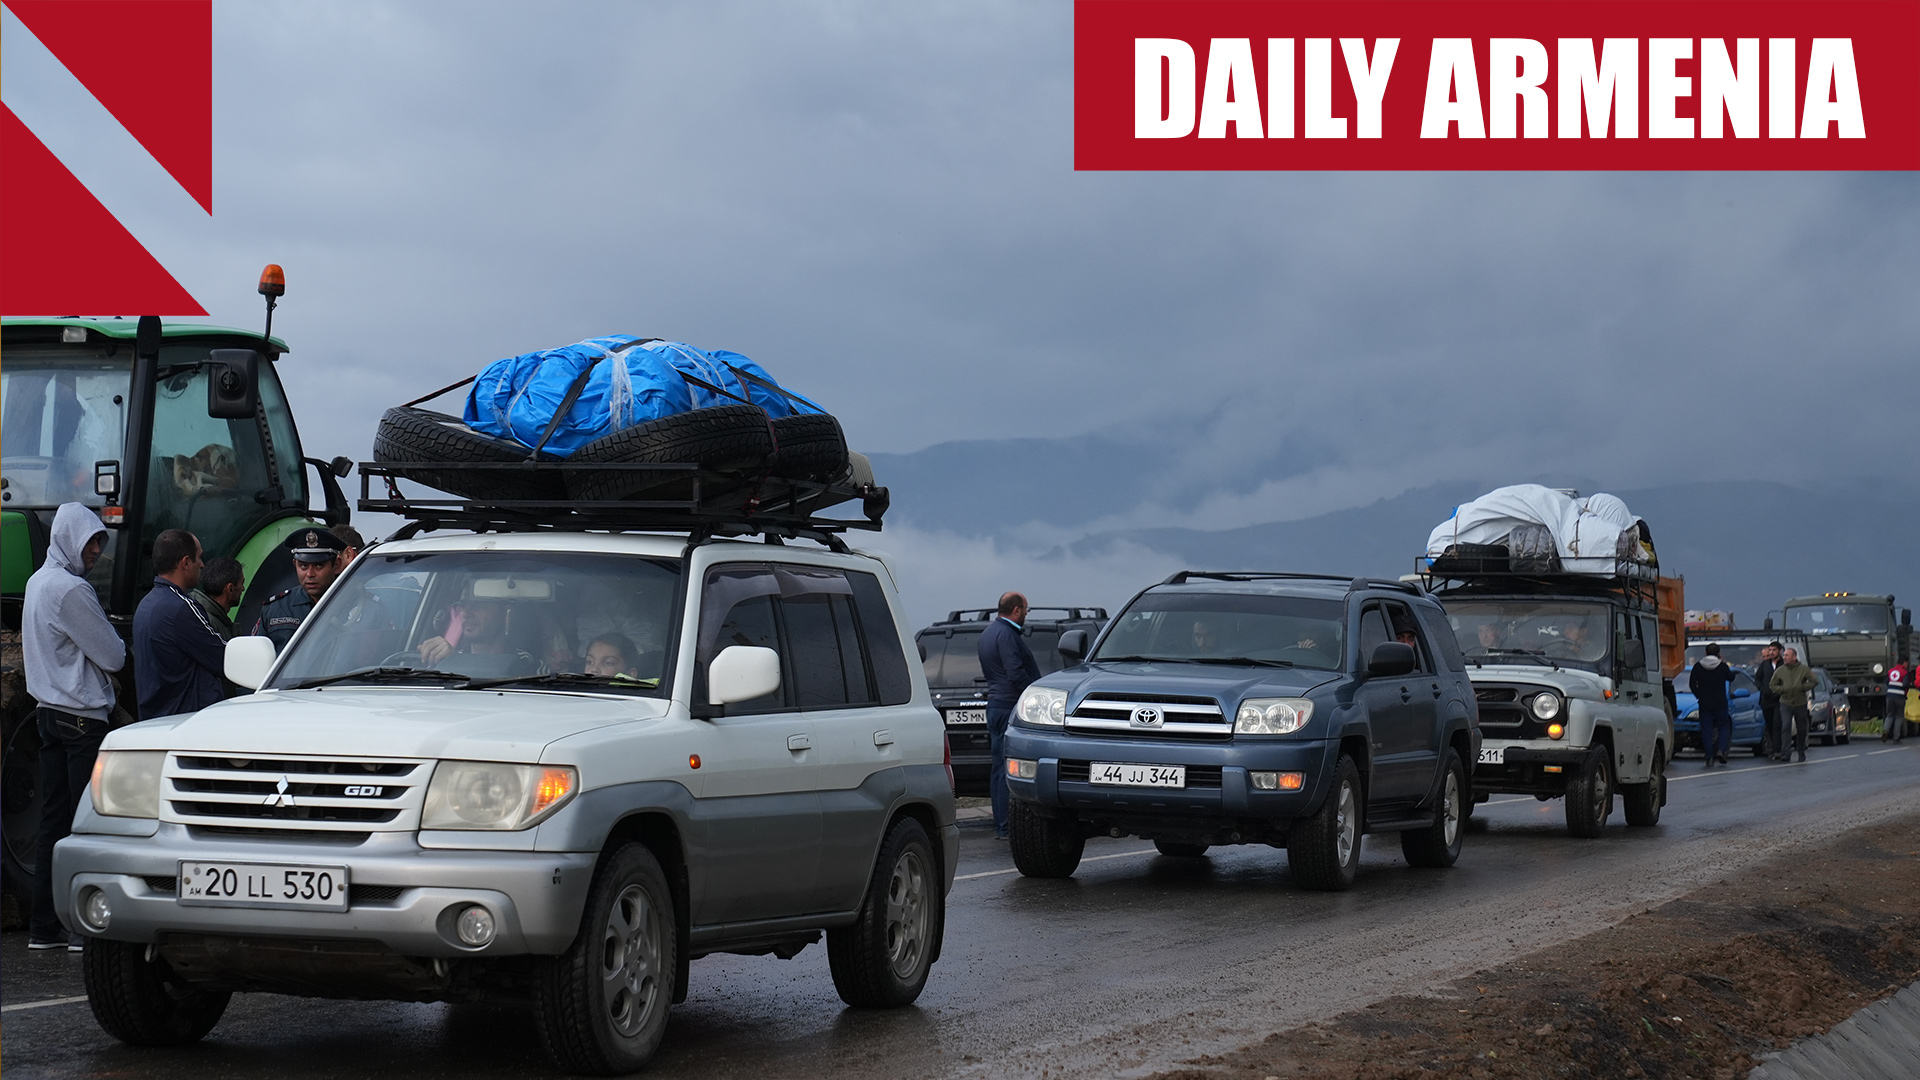 At least 64 reported dead during mass Karabakh exodus